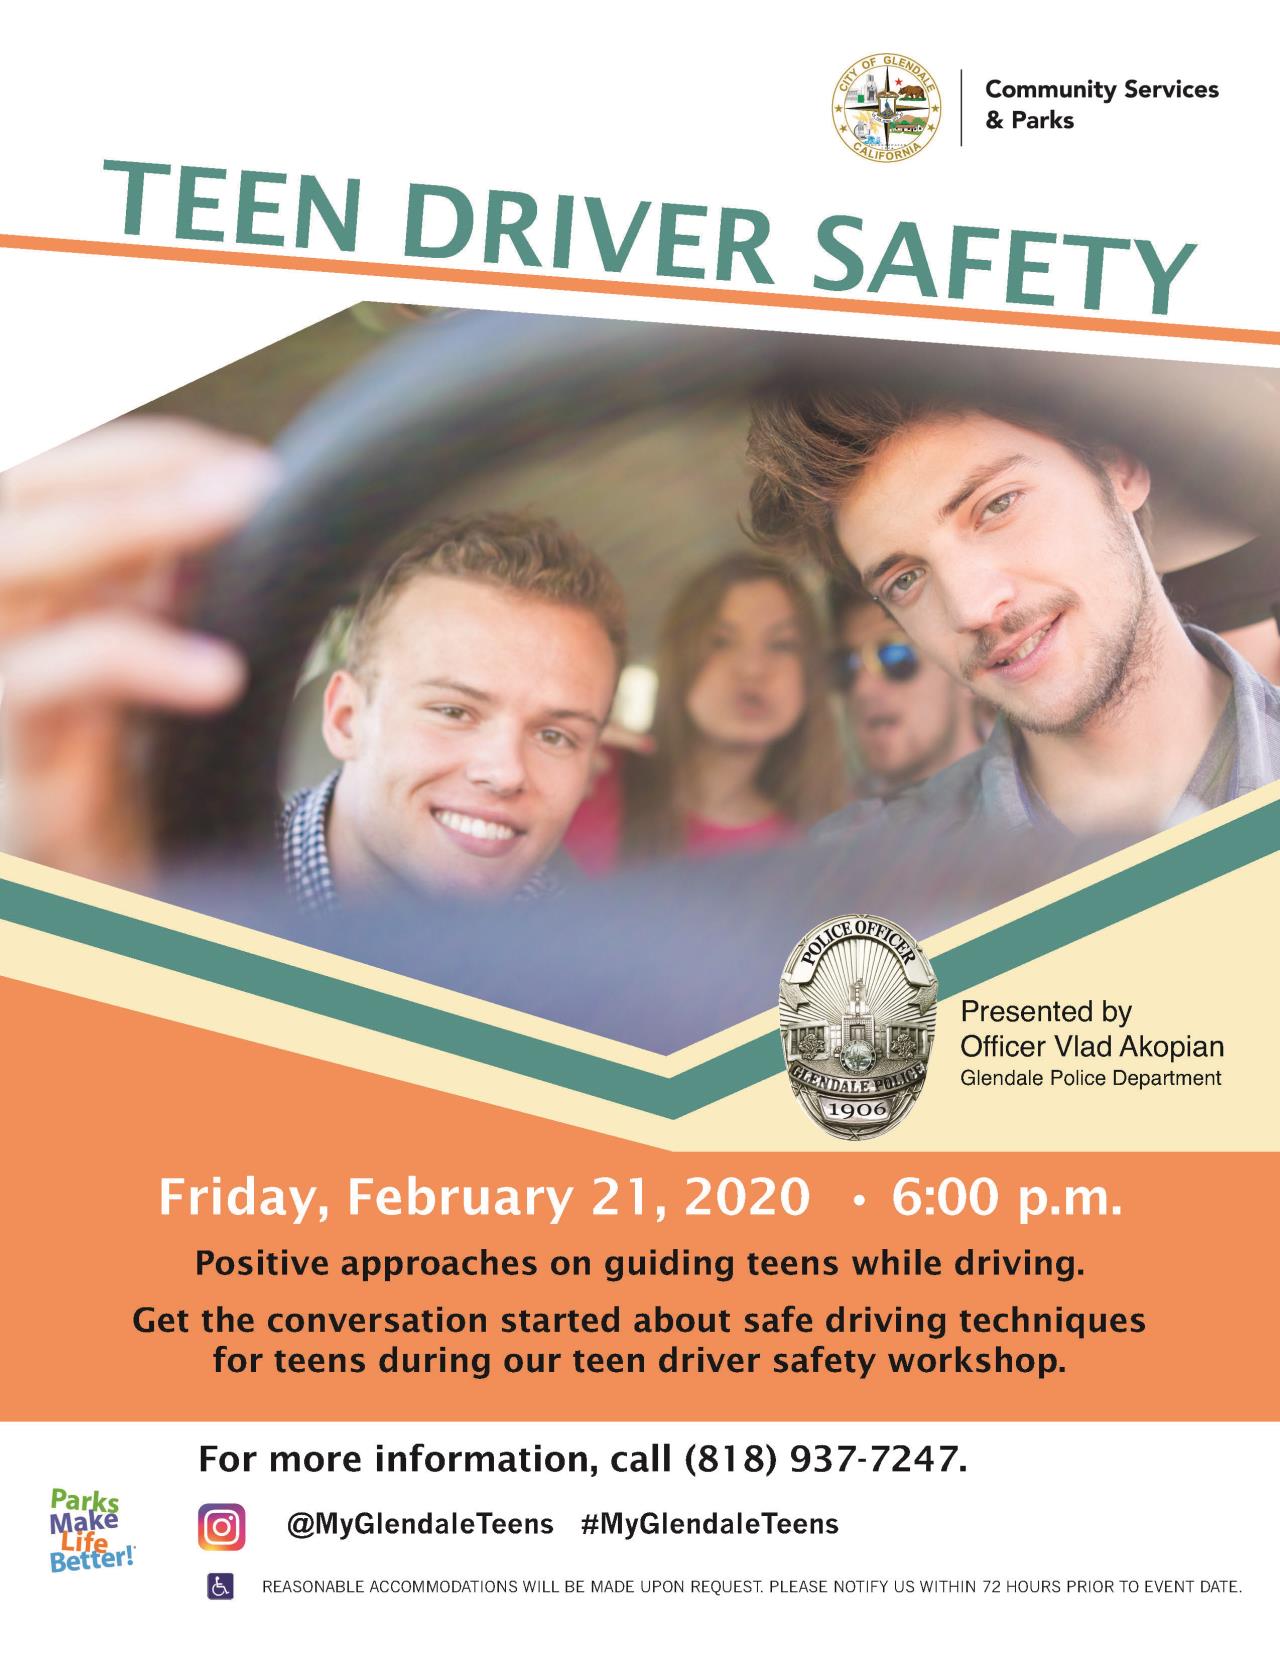 Teen Driver Safety Flyer 2020 NEW LOGO